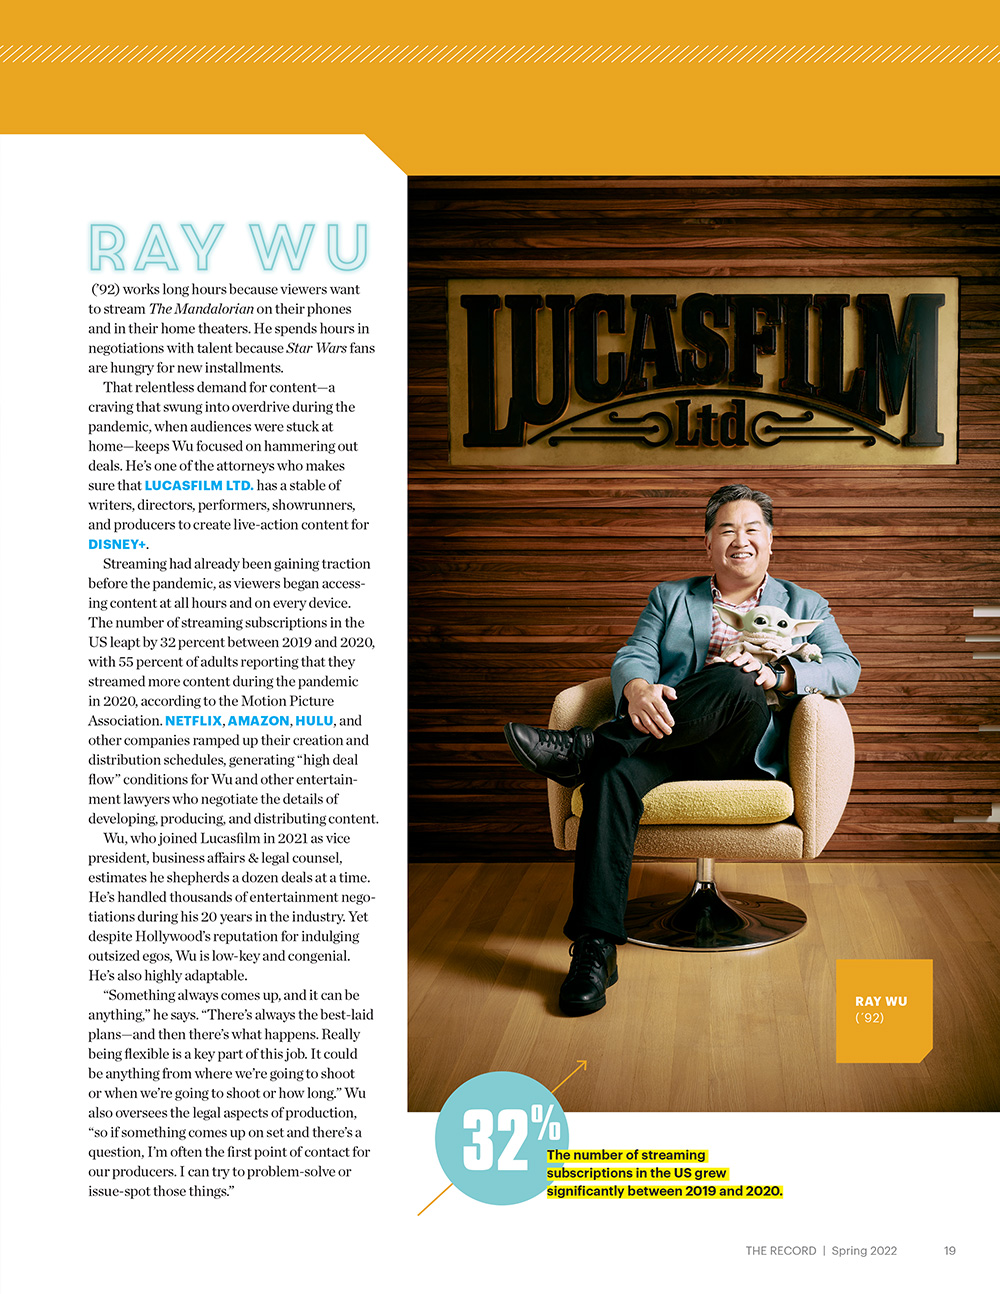 Raymond Wu, vice president, business affairs and legal counsel at Lucasfilm / The Record Spring 2022